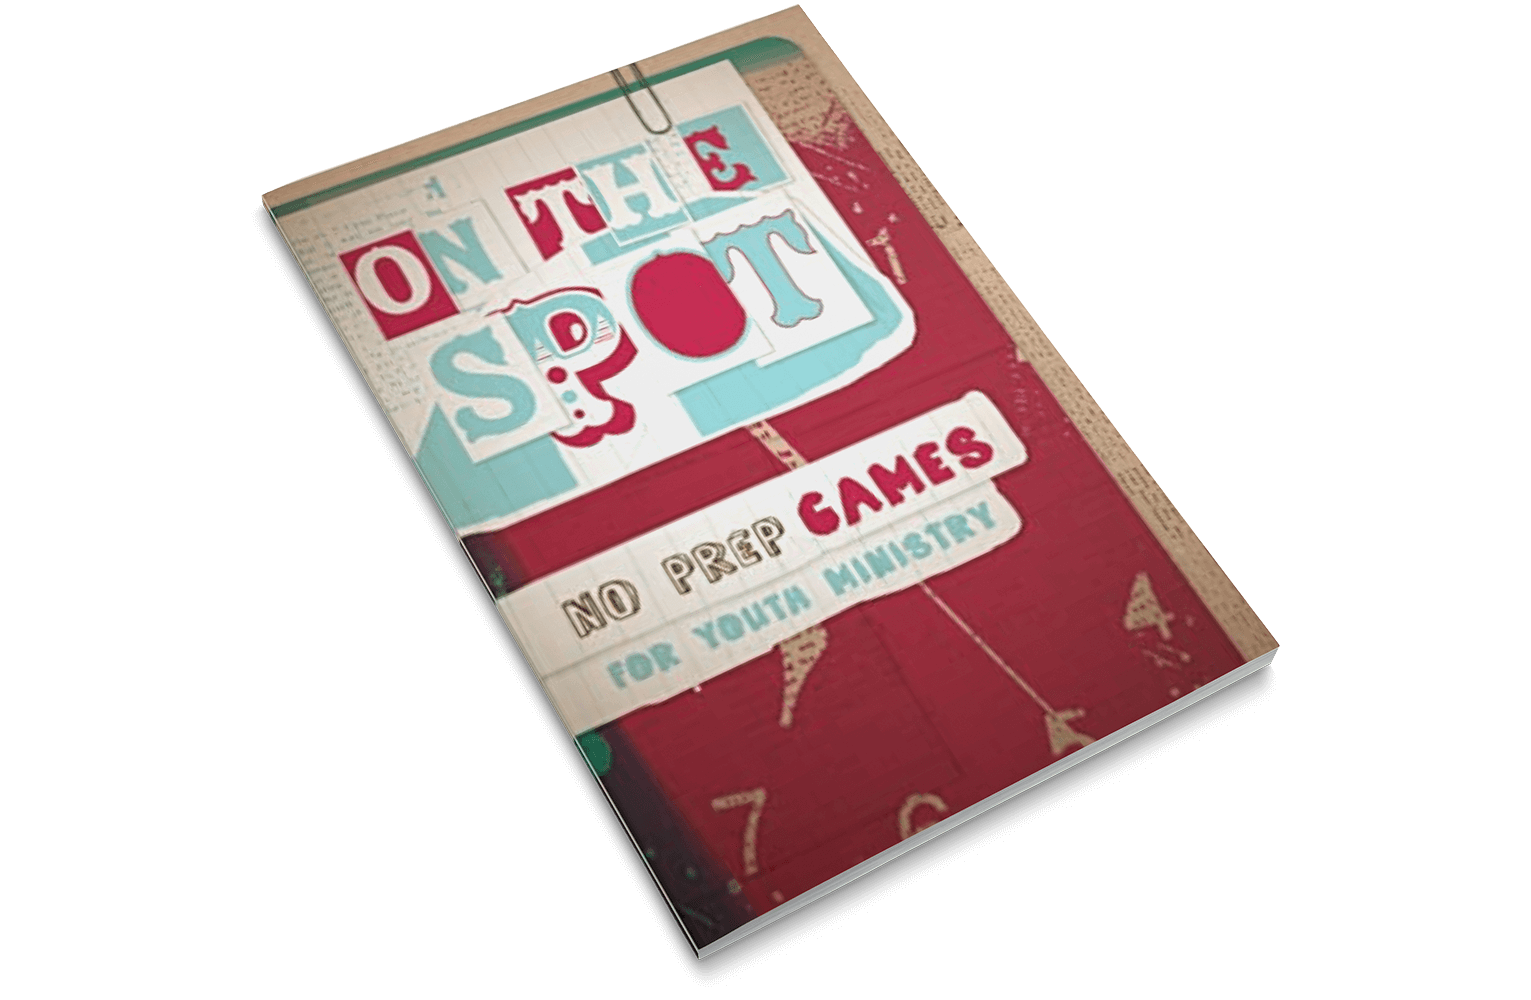 On the Spot: No-Prep Games For Youth Ministry